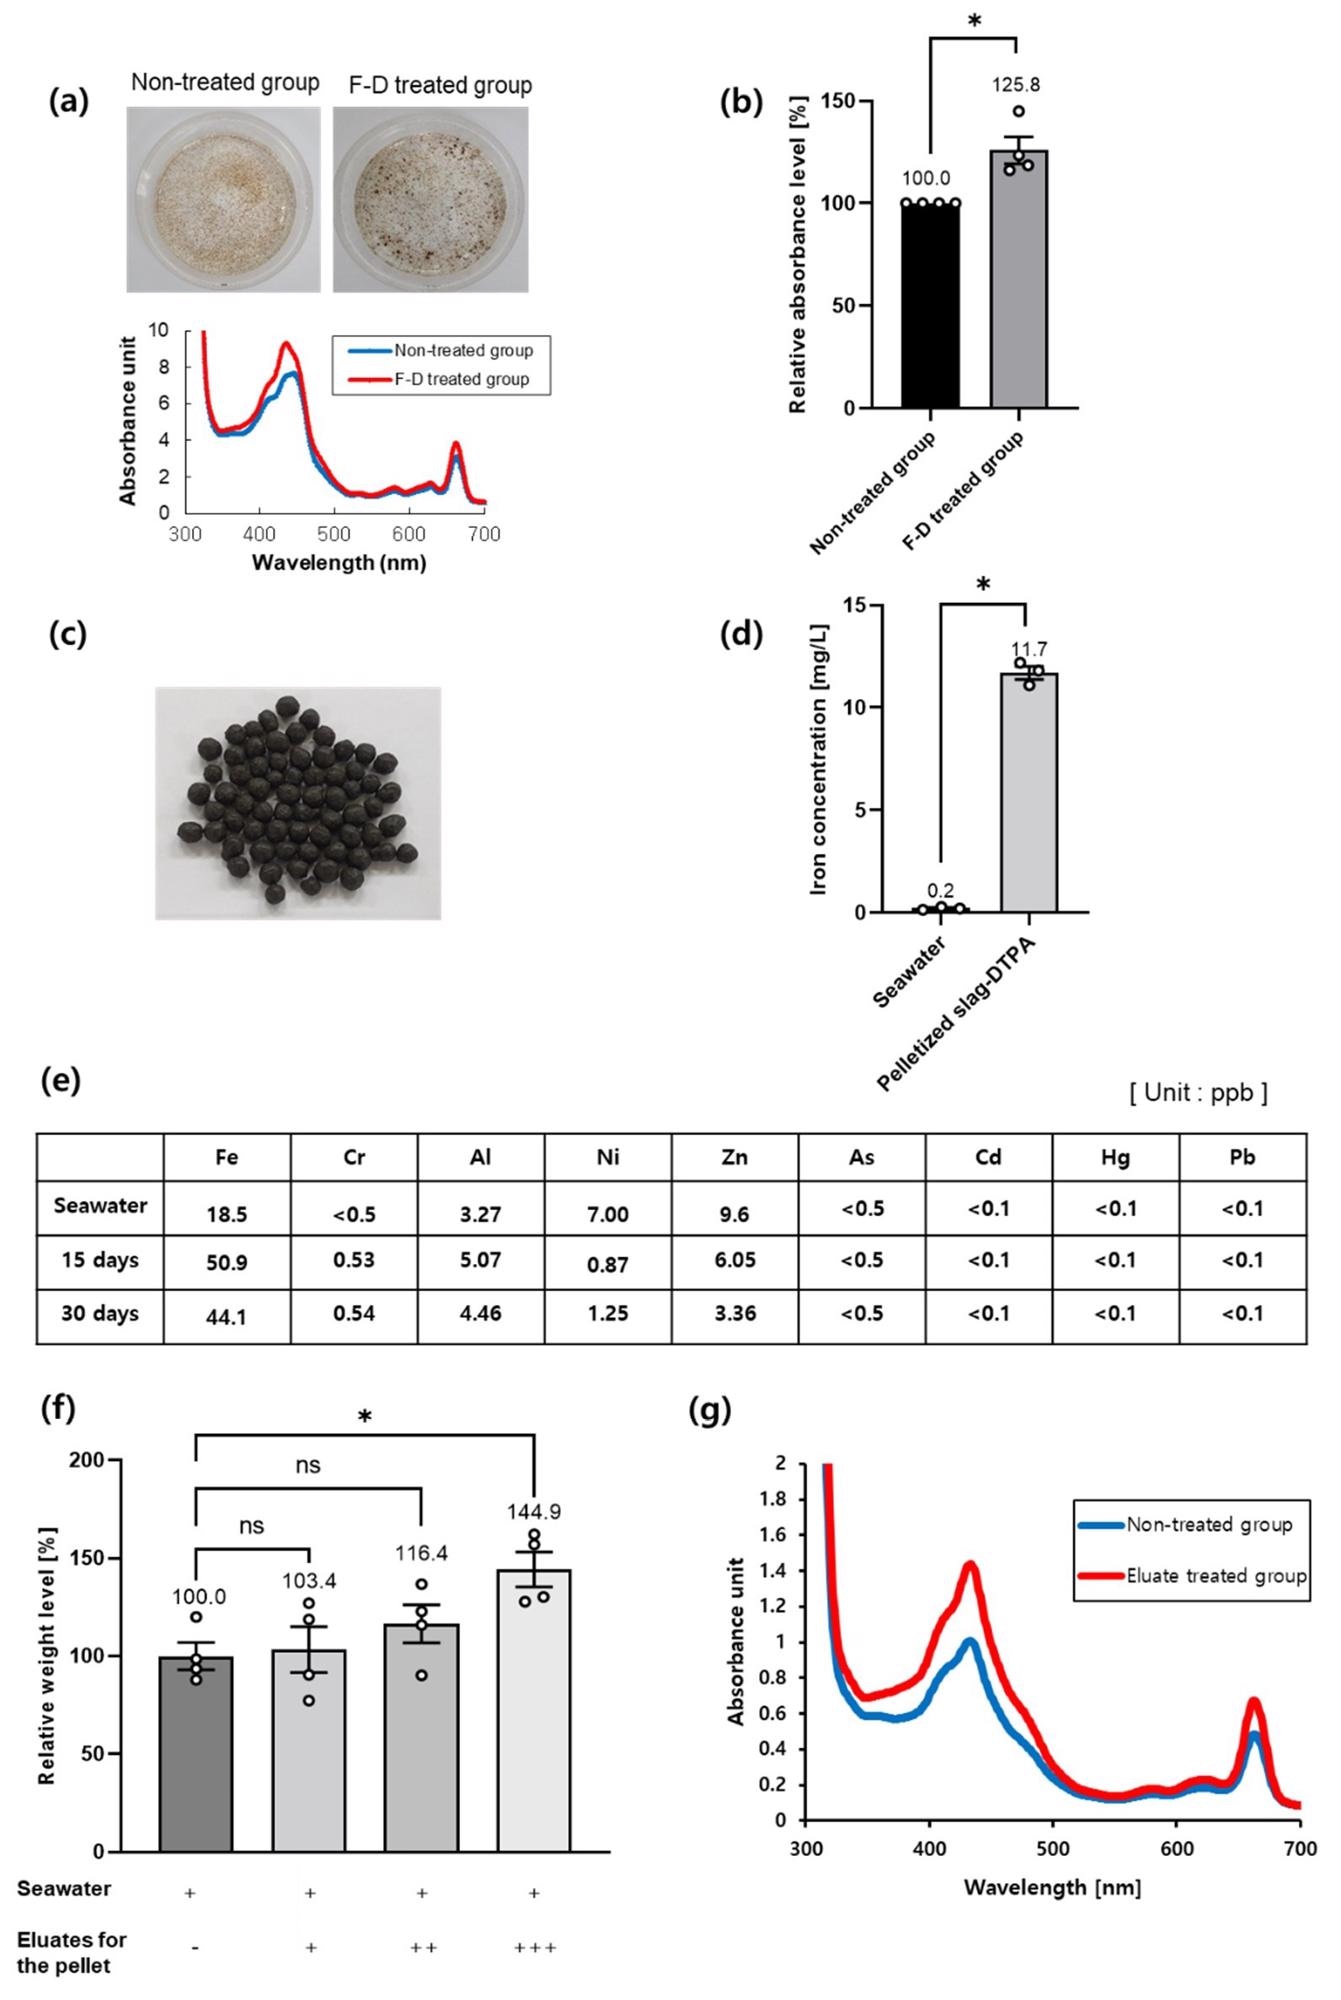 Slag-DTPA promotes seaweed growth. (a) Gametophytes of S. japonica were cultured in the Provasoli-enriched seawater (PES) media. The contents of photosynthetic pigments were measured by using a spectrophotometer. The non-treated group and F-D (Fe-DTPA) treated group absorbance levels were shown and compared. PES media was used as a negative control; (b) The absorbance levels of the non-treated group and the F-D (Fe-DTPA) treated group were measured and compared. (n = 4, * p < 0.05; unpaired Student’s t test; error bars indicate SEMs); (c) A picture of pelletized steel slag and DTPA is shown above; (d) The measurement was conducted with an ICP-MS (n = 3, * p < 0.05; unpaired Student’s t test; error bars indicate SEMs); (e) Element analyses for any potential toxic effects were performed for 30 days. The slag-DTPA pellets were applied in seawater for 30 days. The seawater was fully exchanged daily considering the case of the East Sea. The measurement was conducted by using ICP-MS; (f) The sporophytes of S. japonica were cultured and weights measured. The pellet was eluted in seawater for 48 h. -: negative control, + (Pelletized slag-DTPA): 0.01% of seawater weight, ++: 0.1% of seawater weight, +++: 1% of seawater weight (n = 6, ns, not significant, * p < 0.05; by ordinary one-way ANOVA followed by Dunnett’s multiple comparisons test; error bars indicate SEMs); (g) The photosynthetic absorption spectrum of the pelletized slag-DTPA eluate treated group and the non-treated (seawater only) group are shown above.